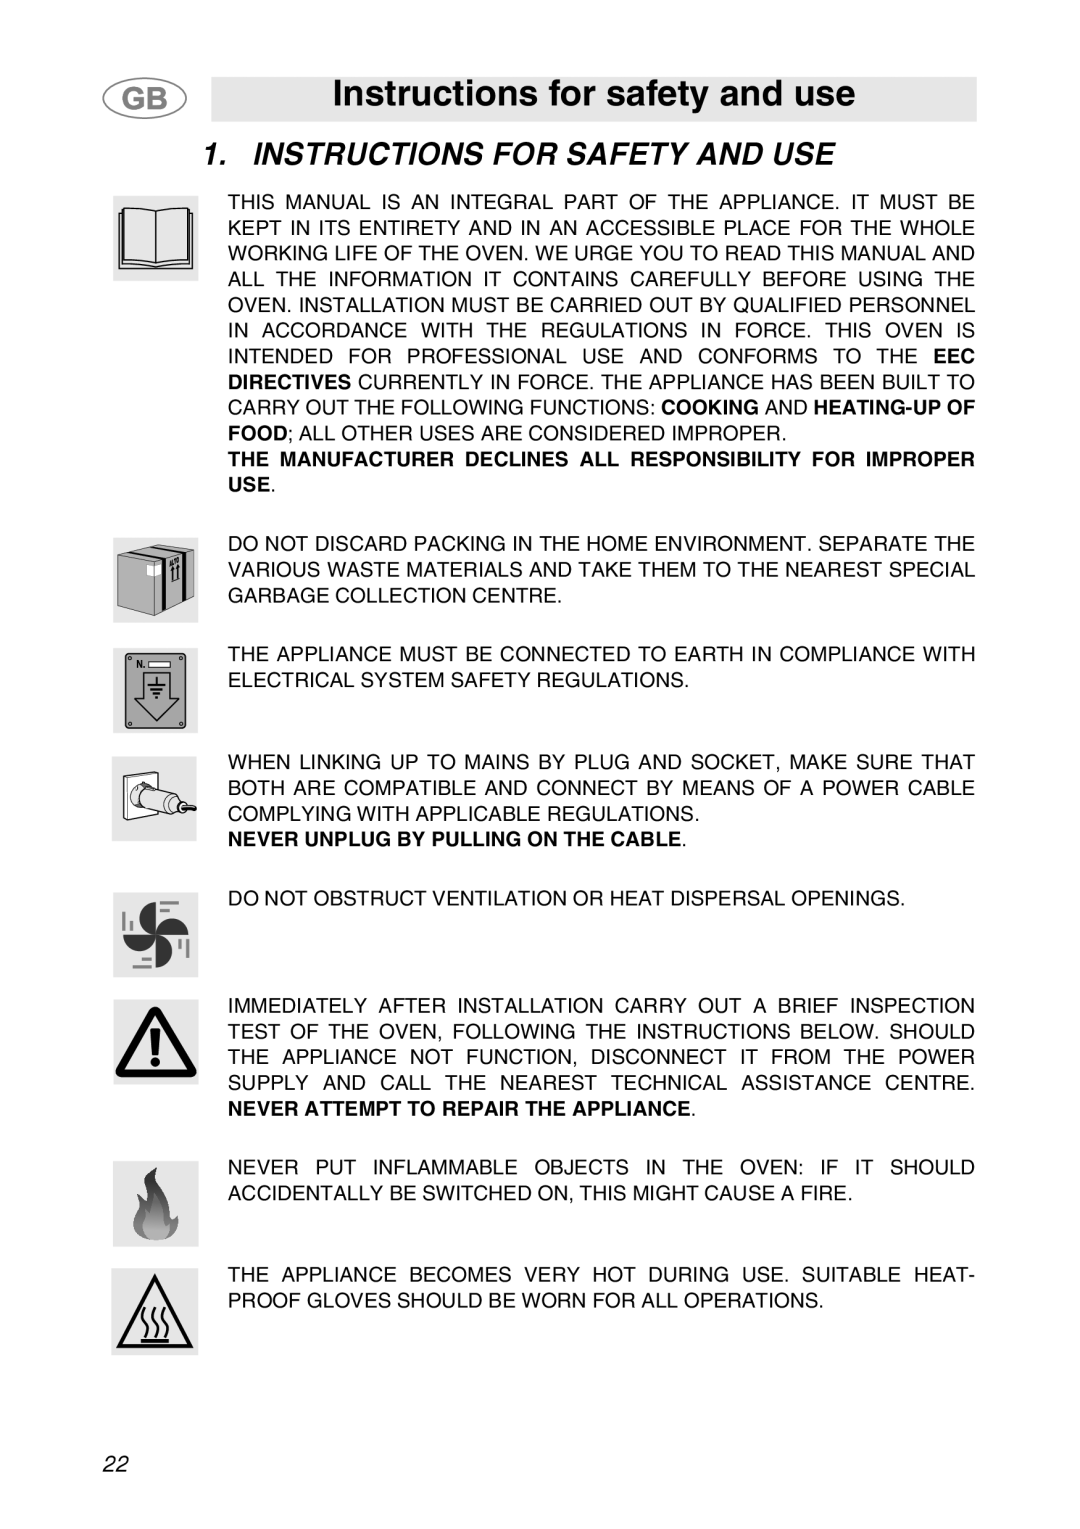 Smeg ALFA341XM Instructions for safety and use, Instructions For Safety And Use, Never Unplug By Pulling On The Cable 